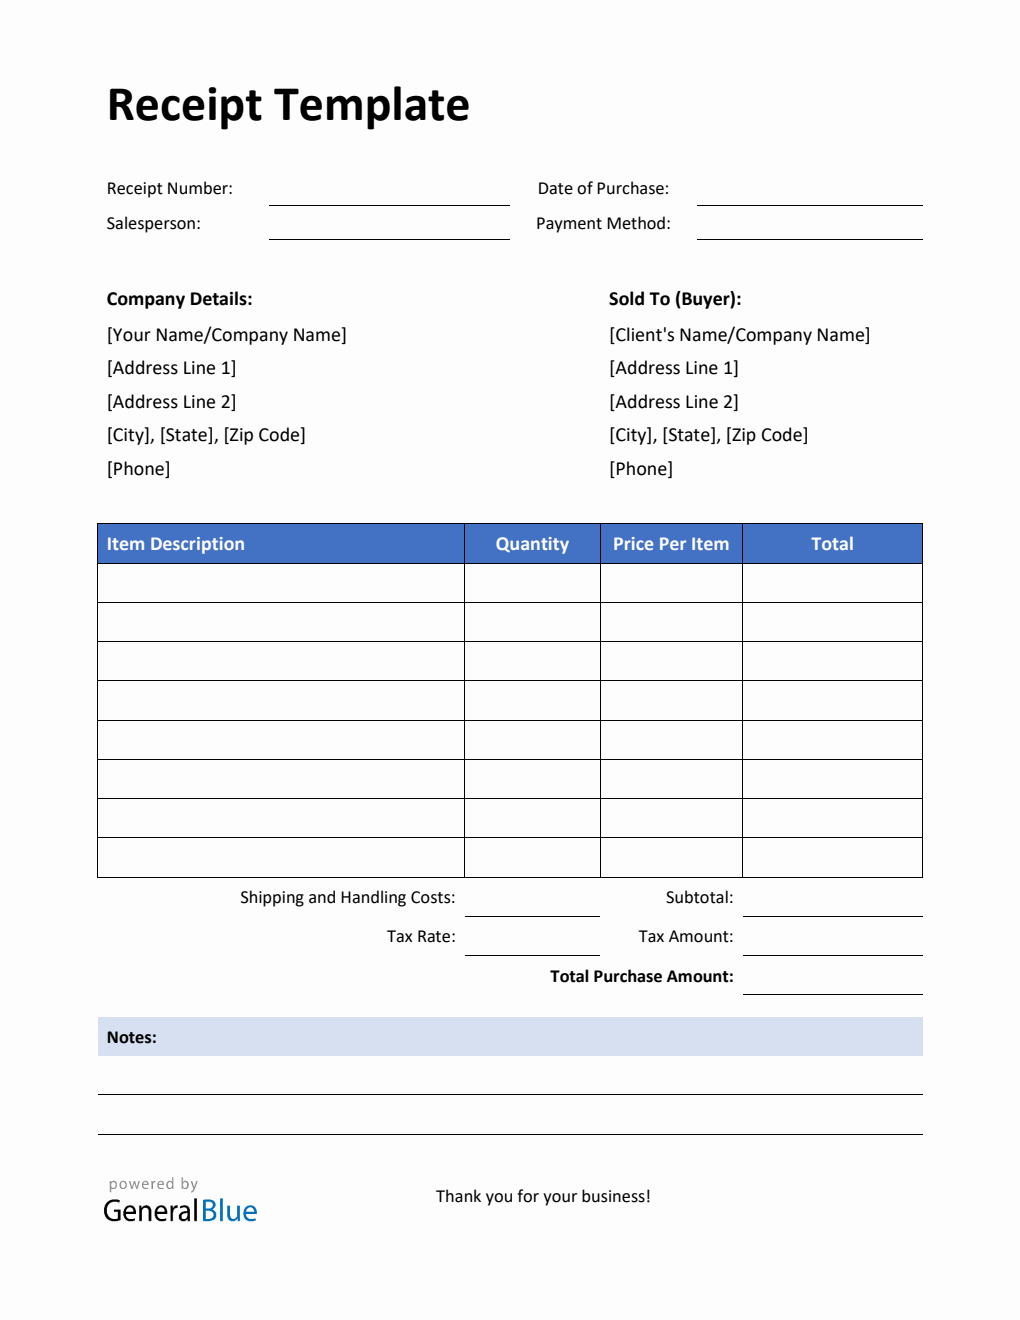 Simple Receipt Template with Notes in Word